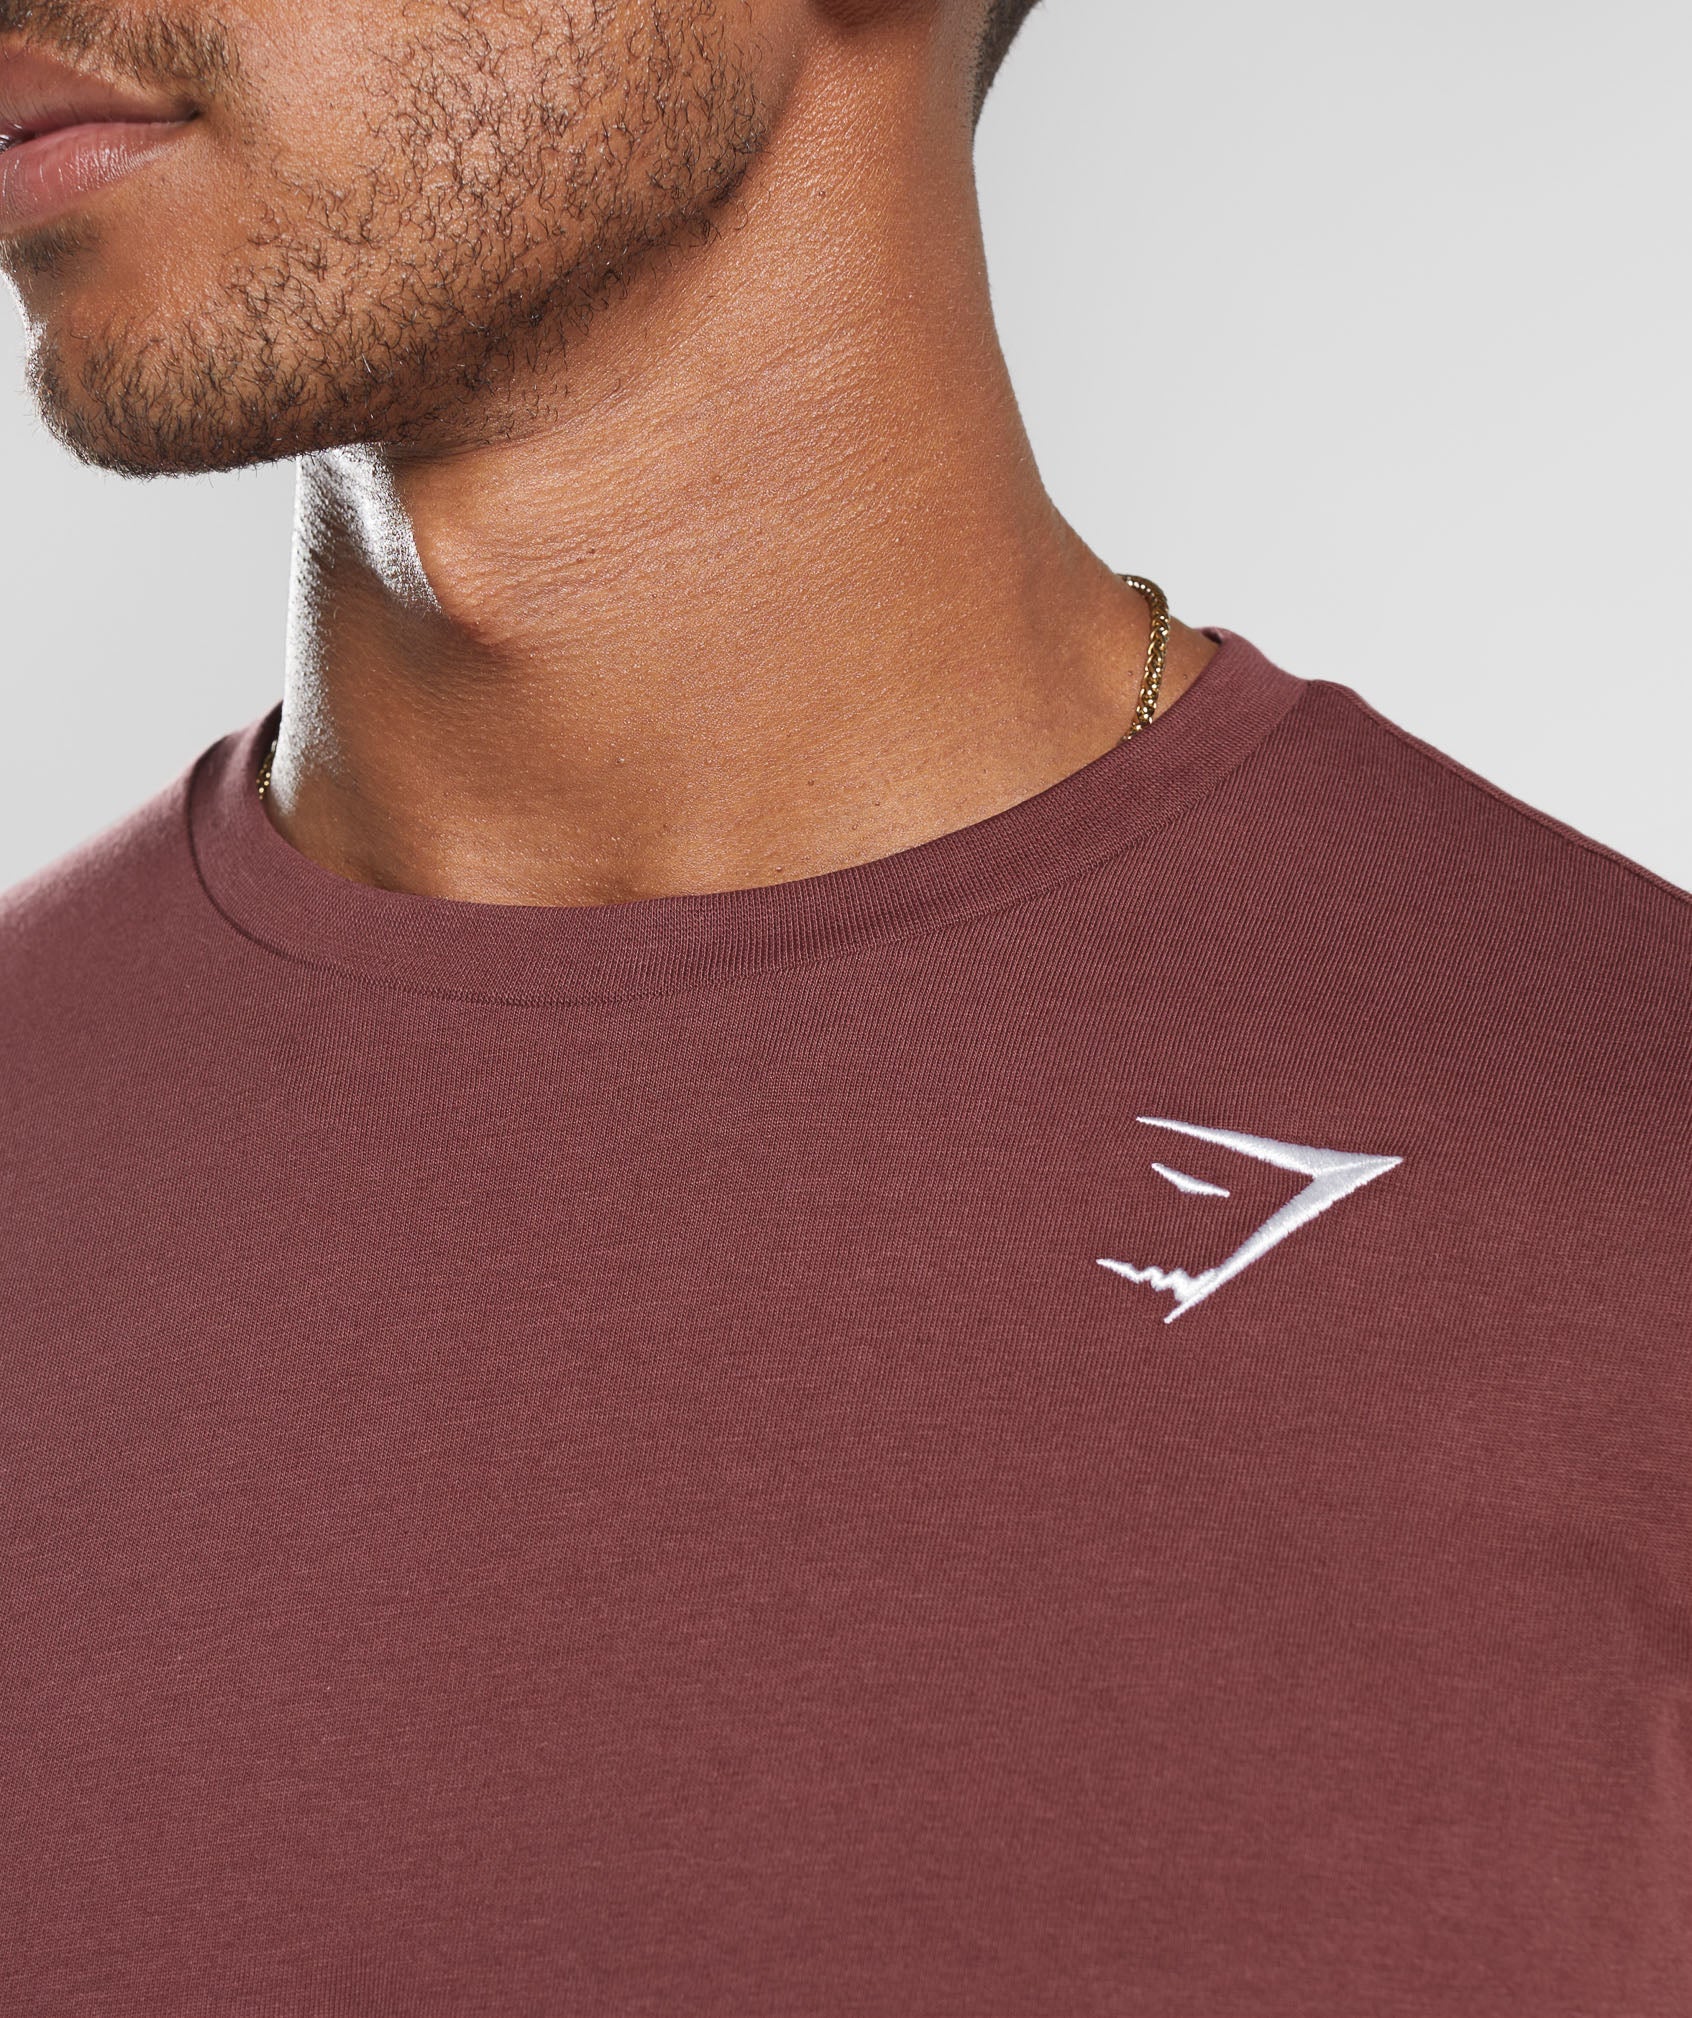 Crest T-Shirt in Washed Burgundy - view 5